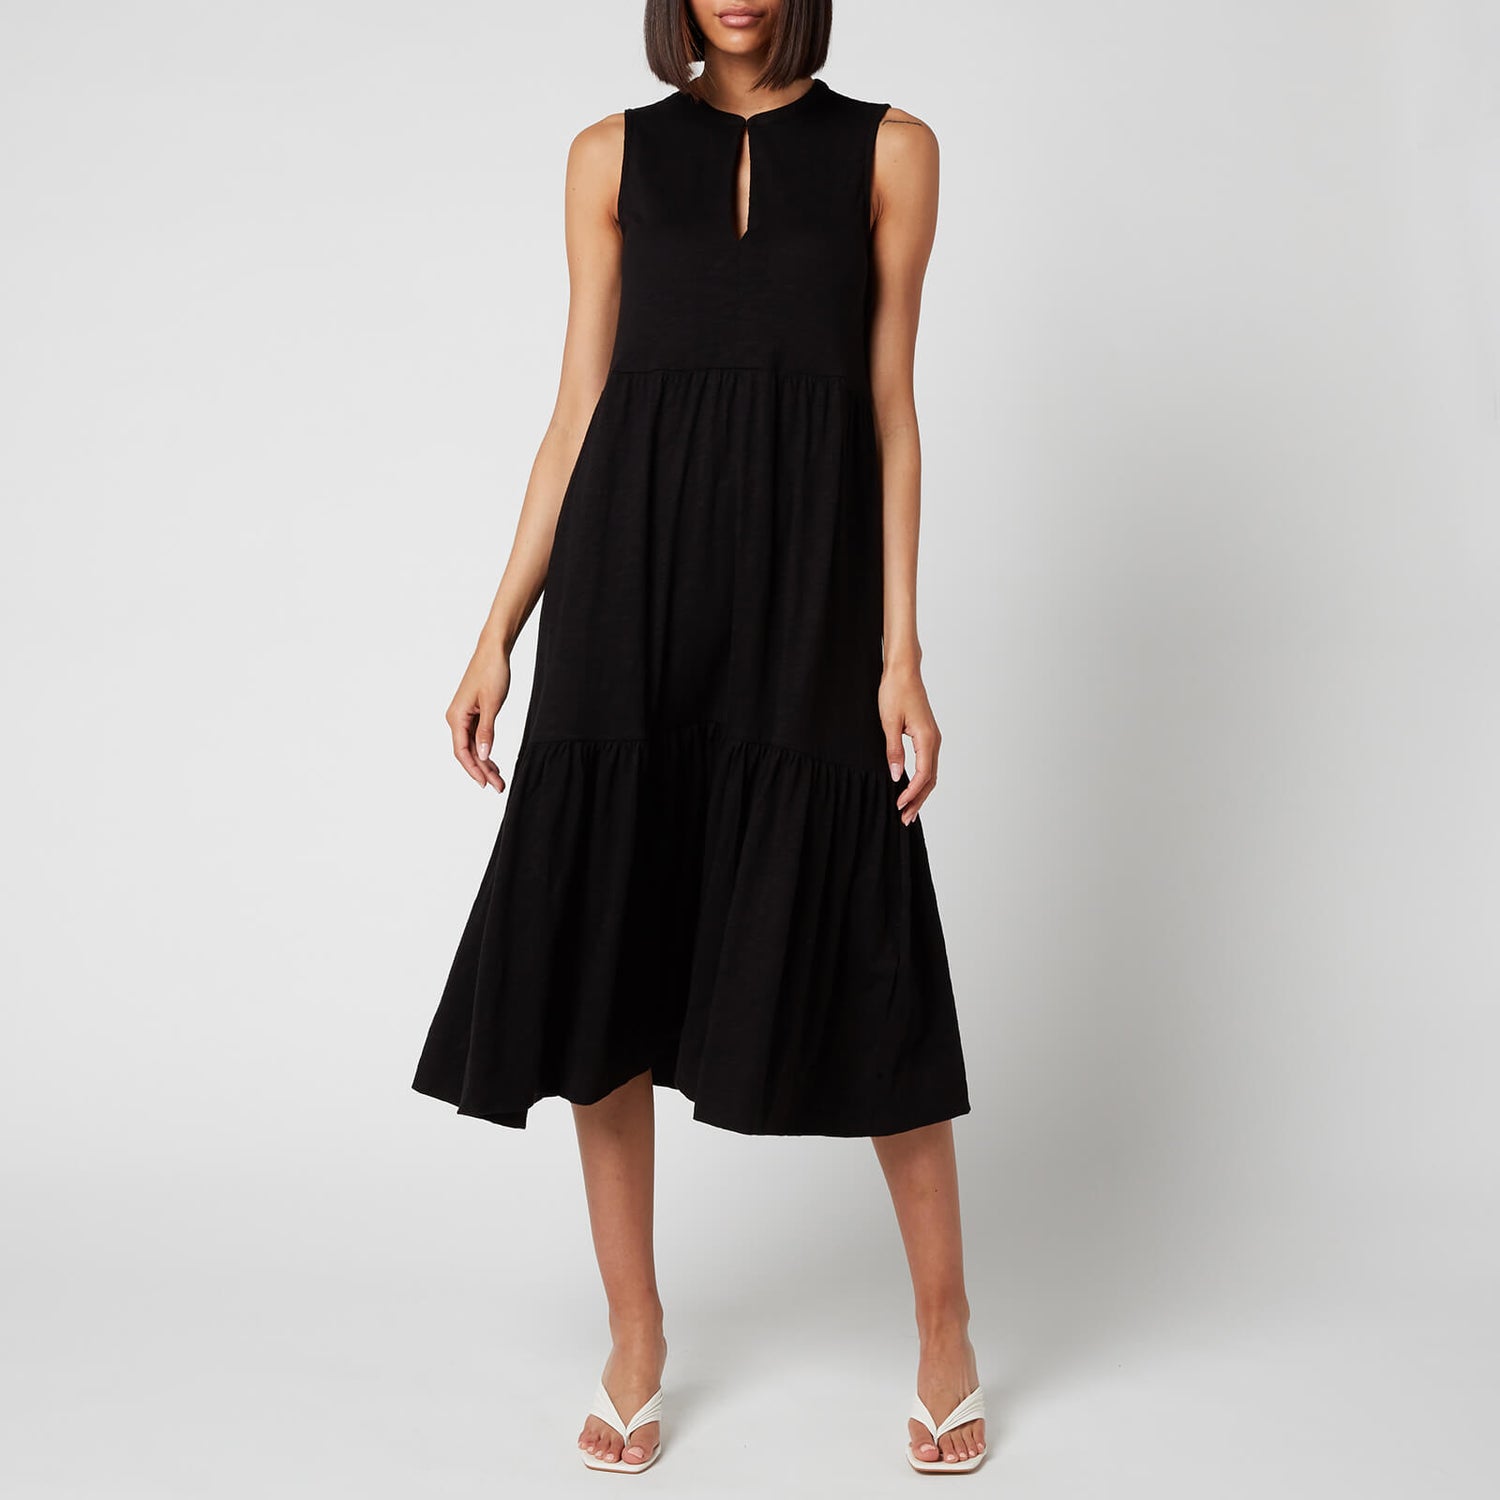 Whistles Women's Tiered Jersey Dress - Black